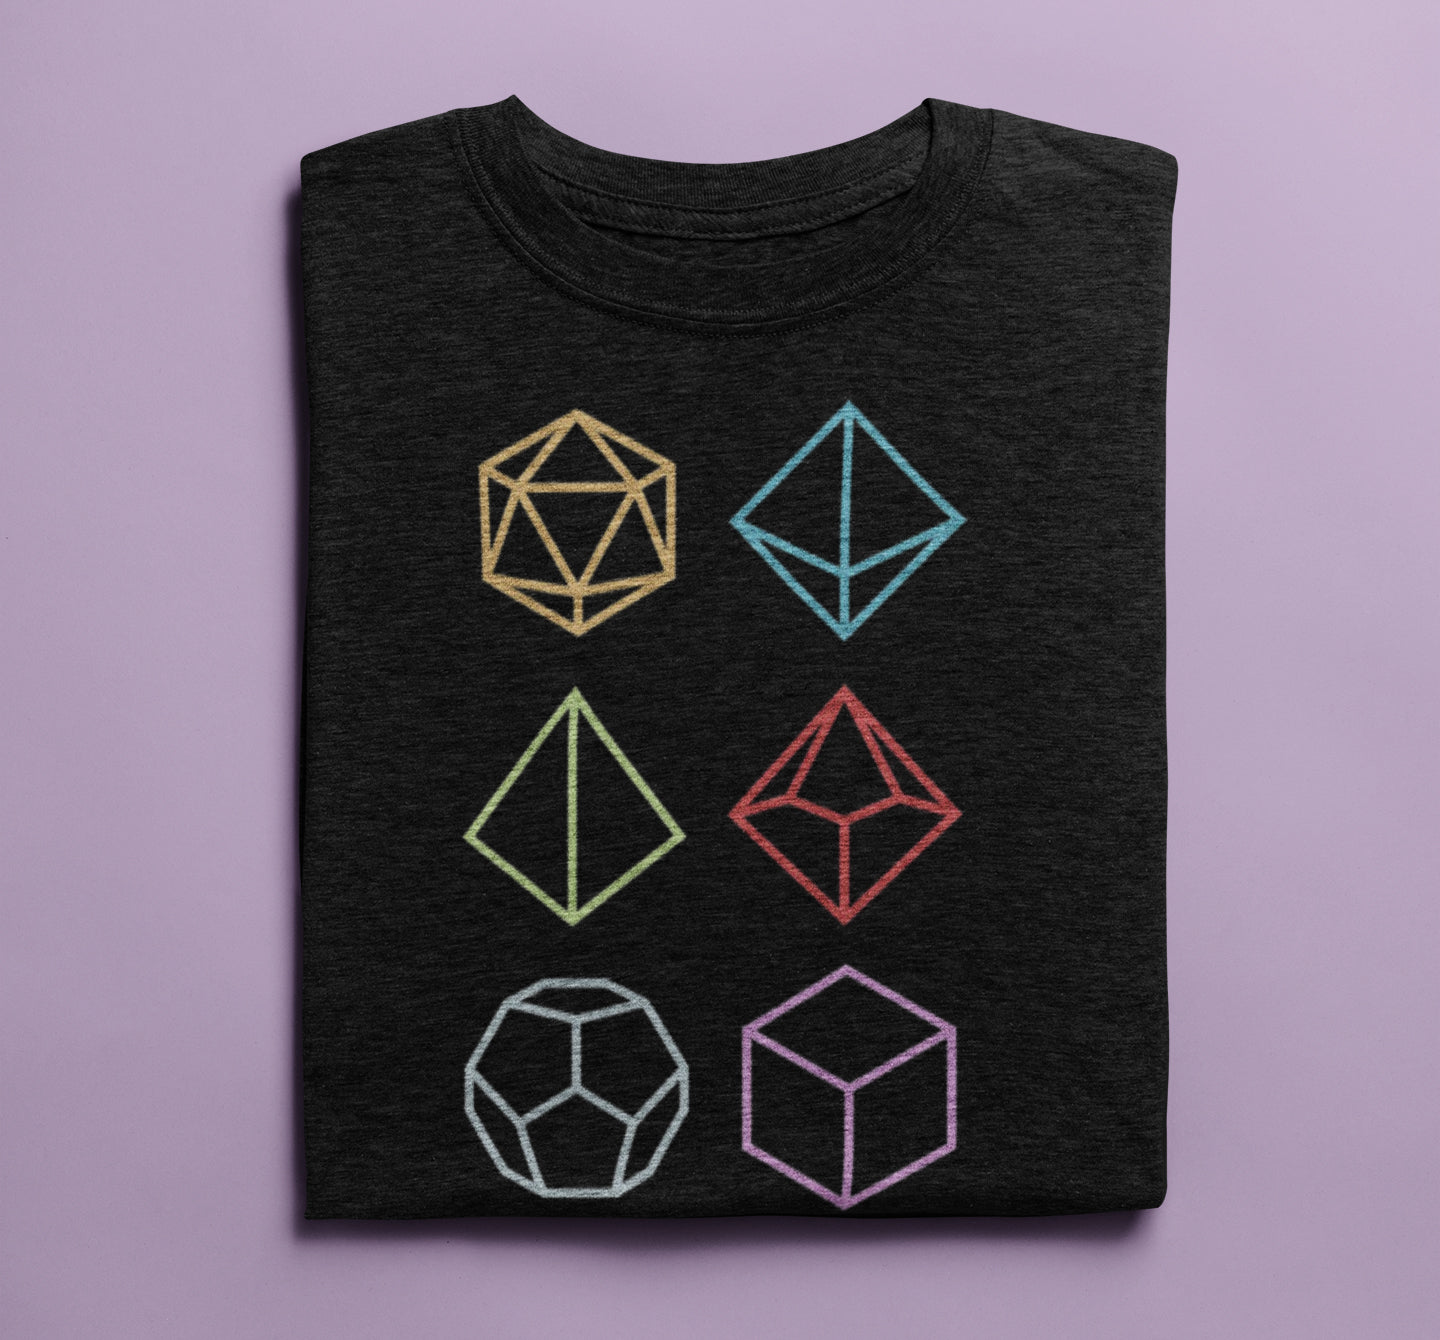 Multi-Sided Gamer Dice Icons Unisex T-Shirt by Sexy Hackers